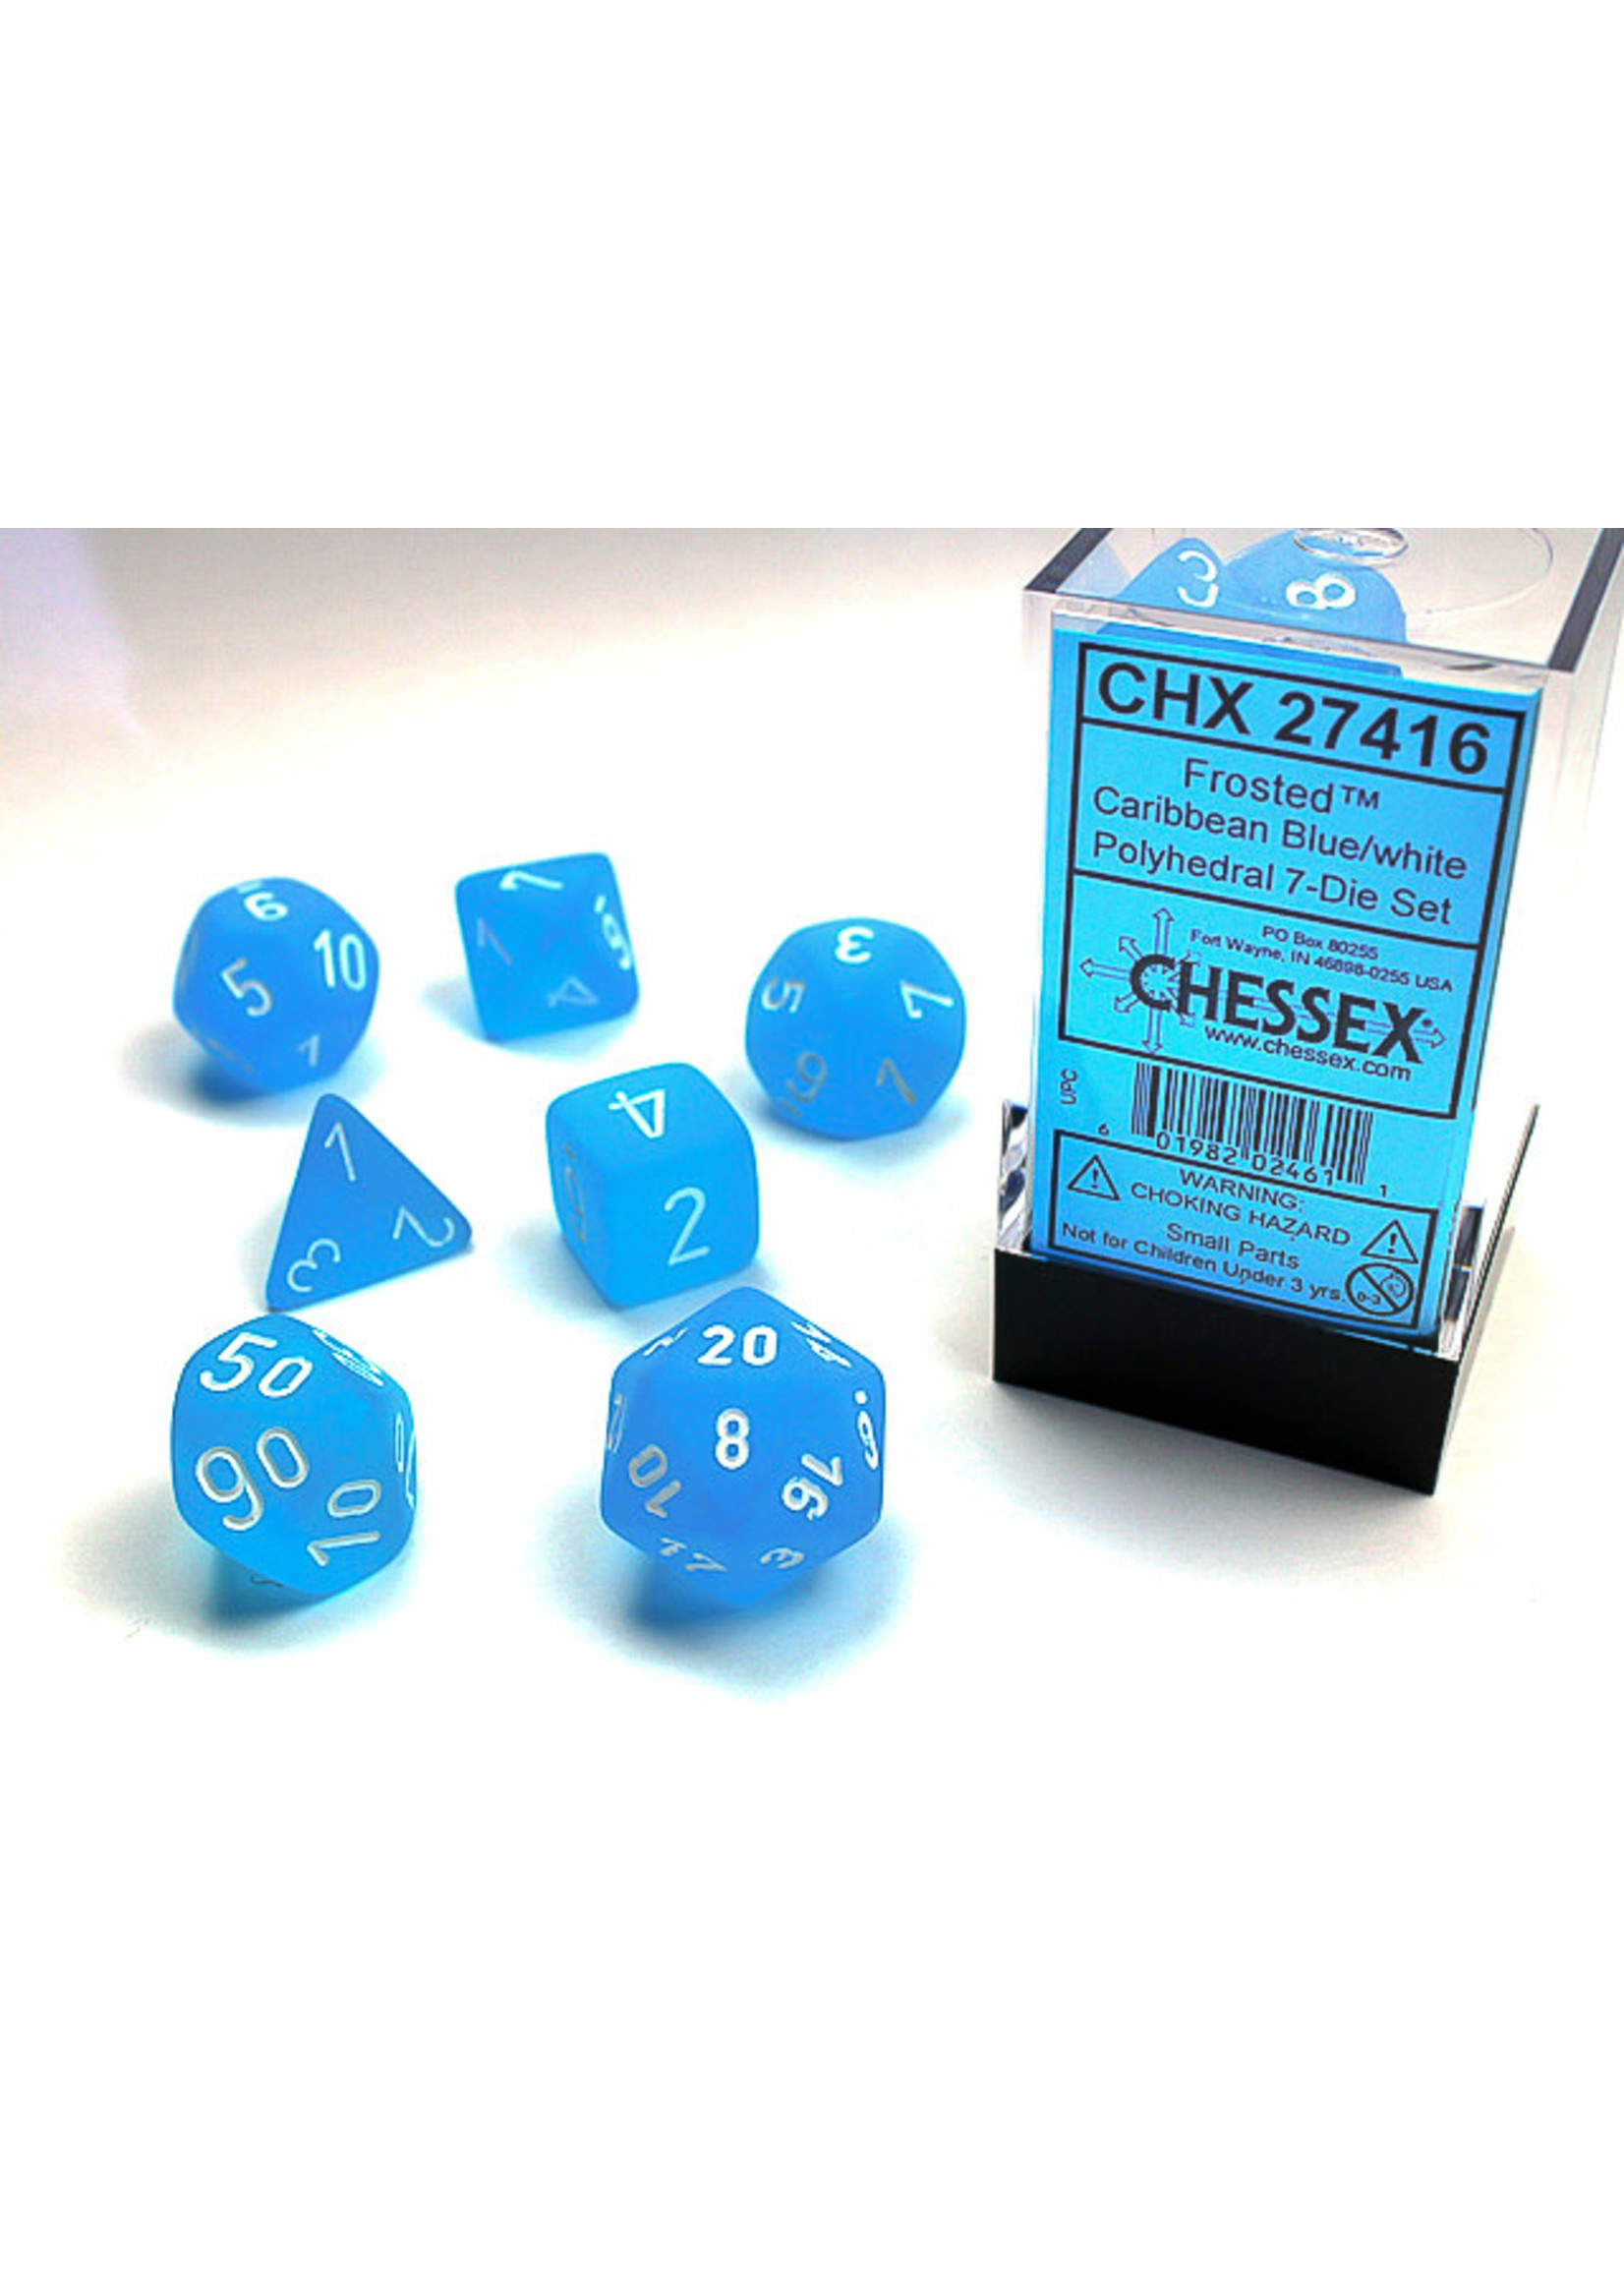 Chessex Frosted: Caribean Blue/White - Set of 7 Polyhedral Dice by Chessex